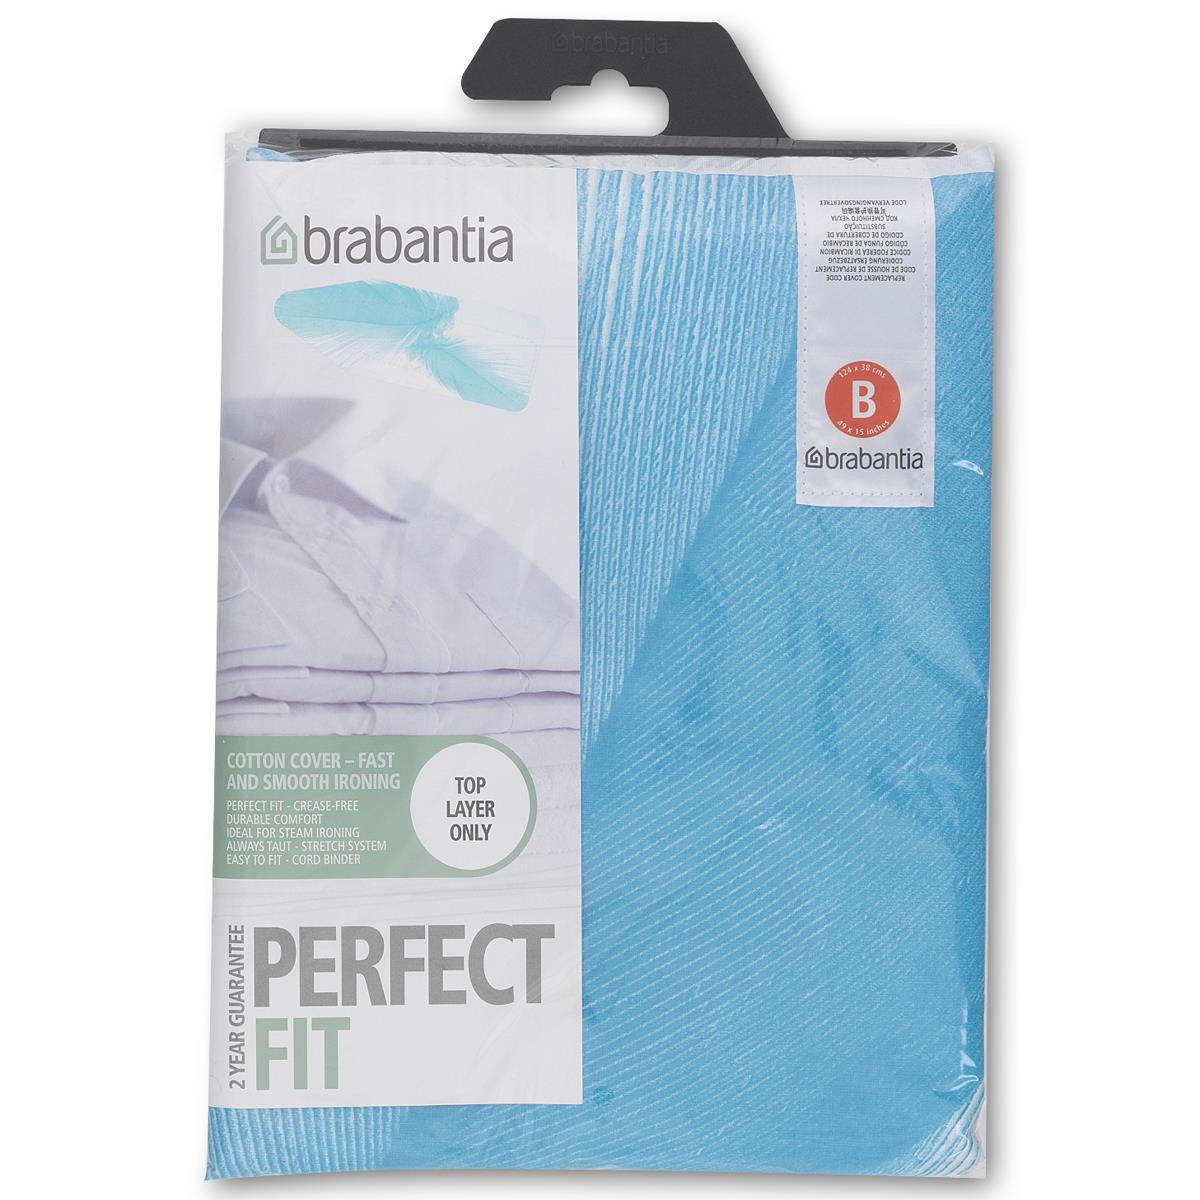 Brabantia Size B Ironing Board Cover Assorted Designs